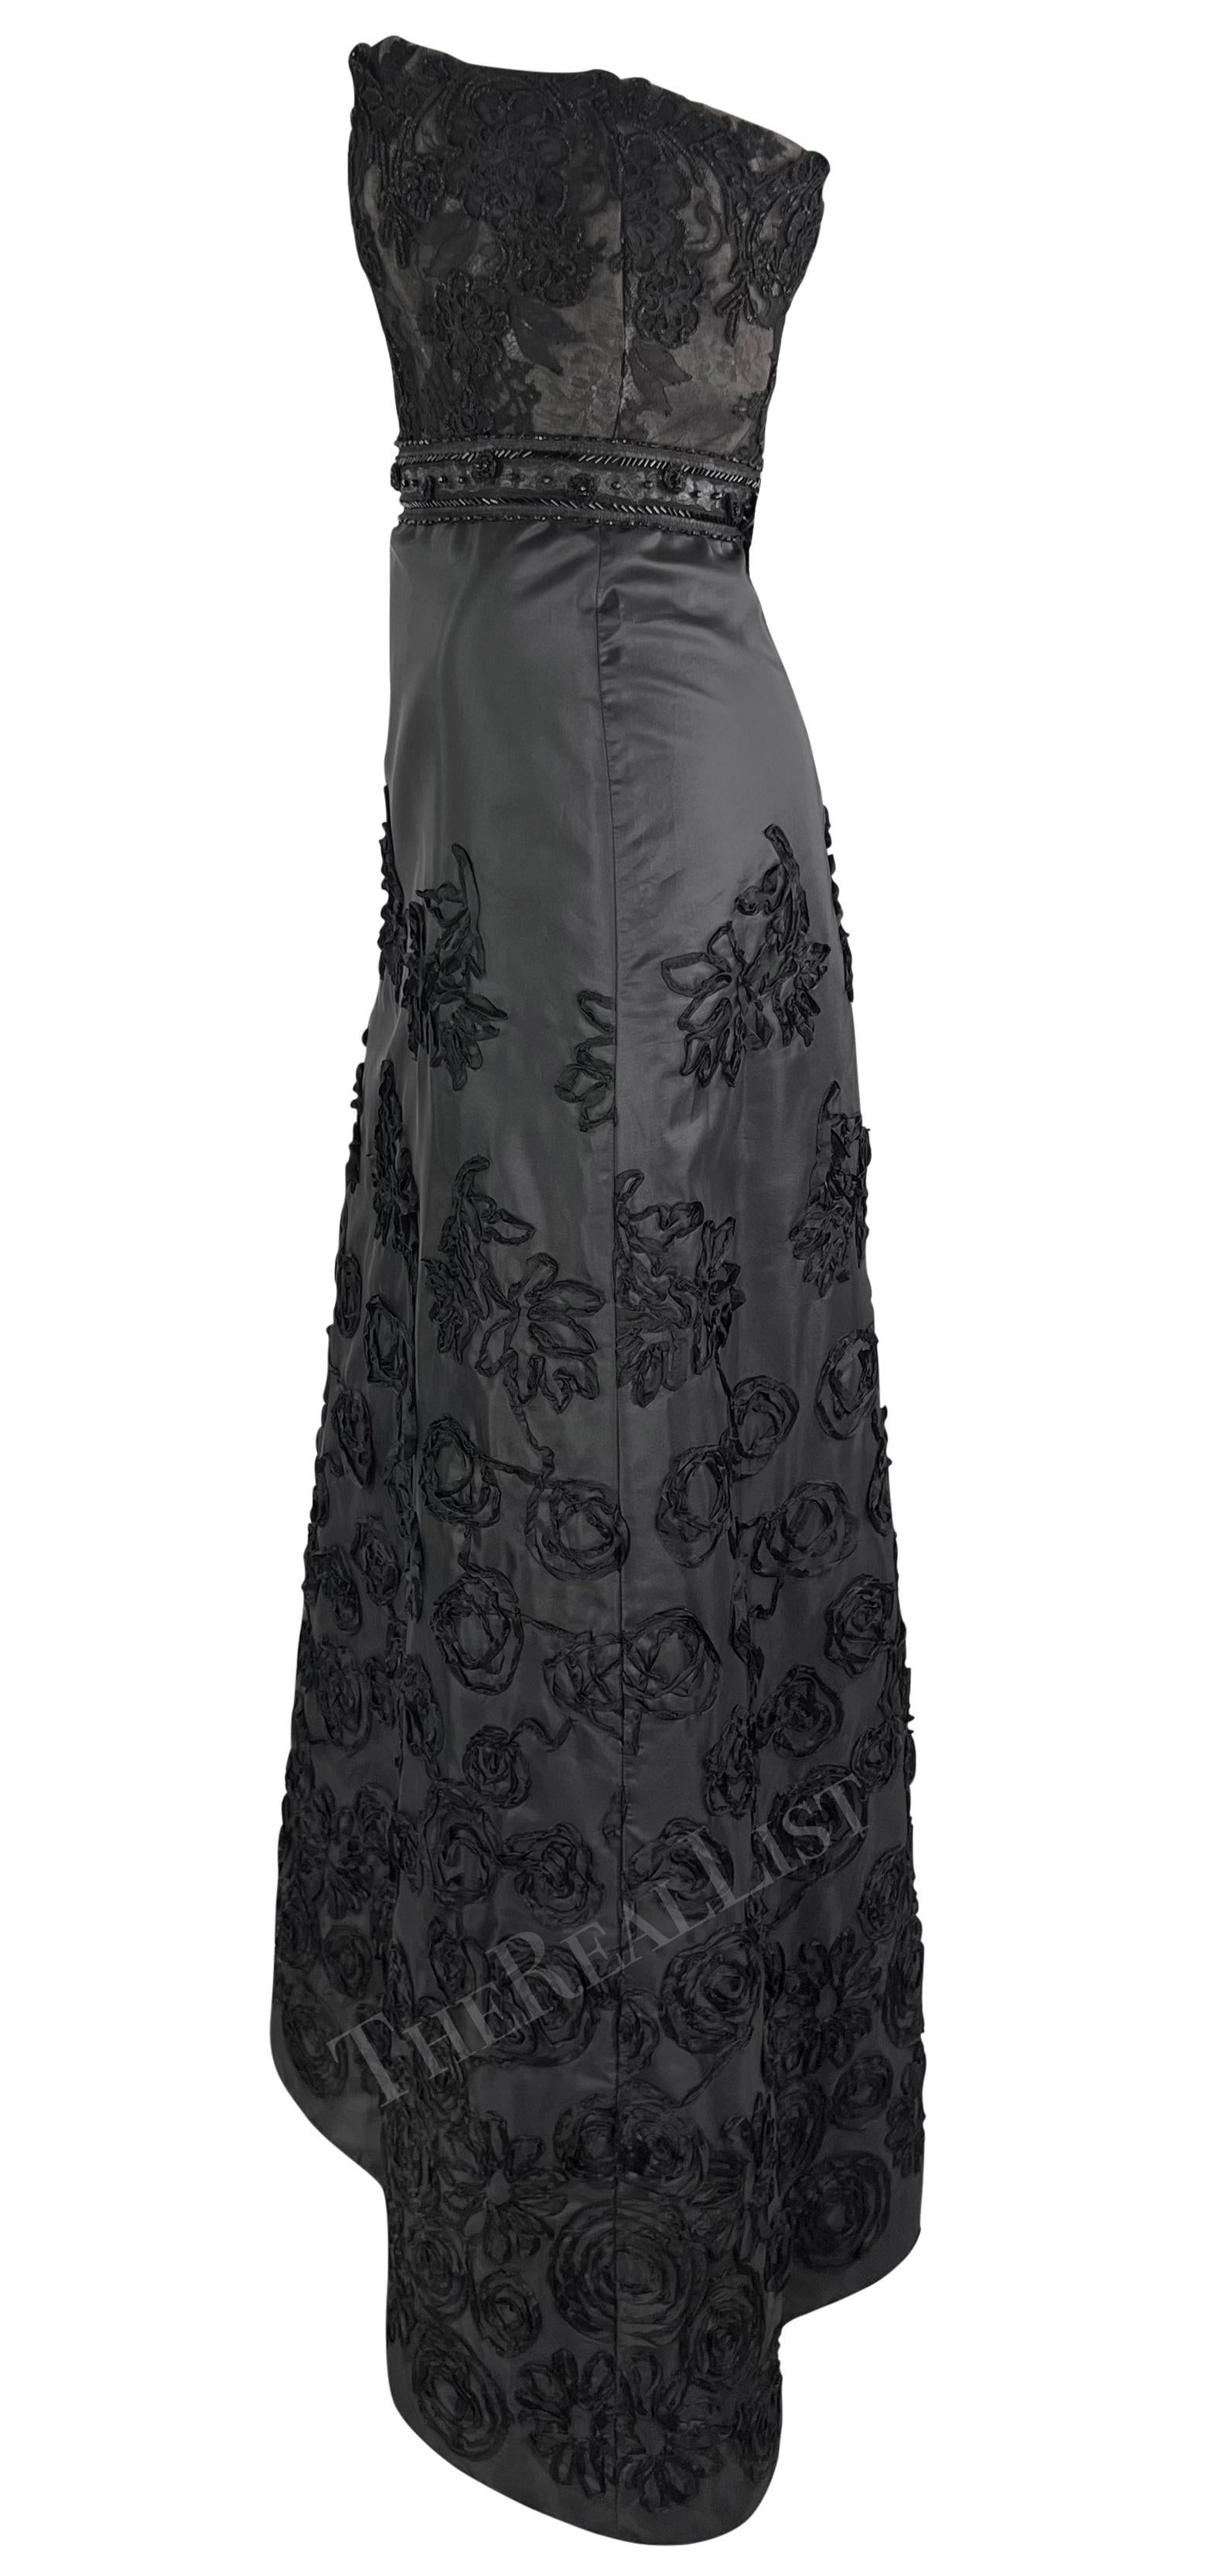 Women's S/S 1999 Christian Lacroix Beaded Lace Overlay Strapless Taffeta Evening Gown For Sale